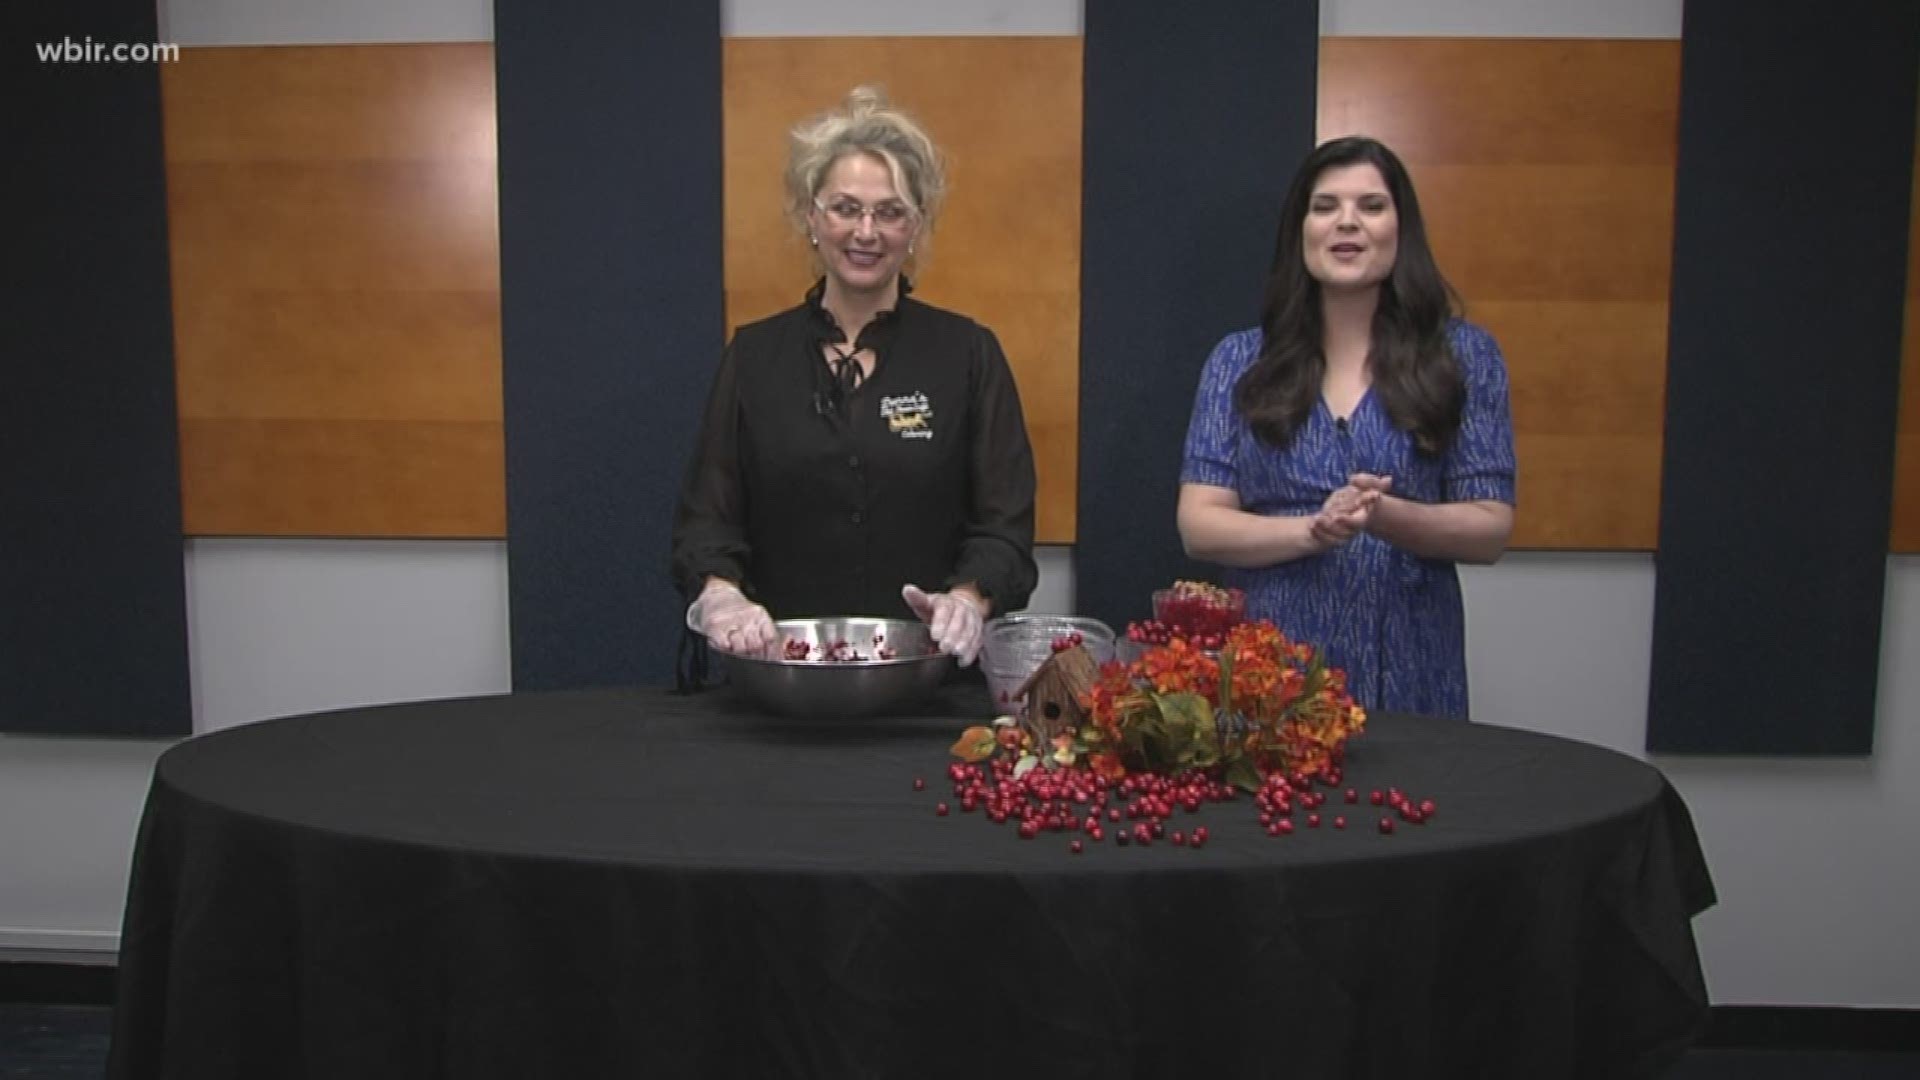 Melissa Graves from Donna's Old Town Cafe in Madisonville is showing us how to make a Cranberry Relish.